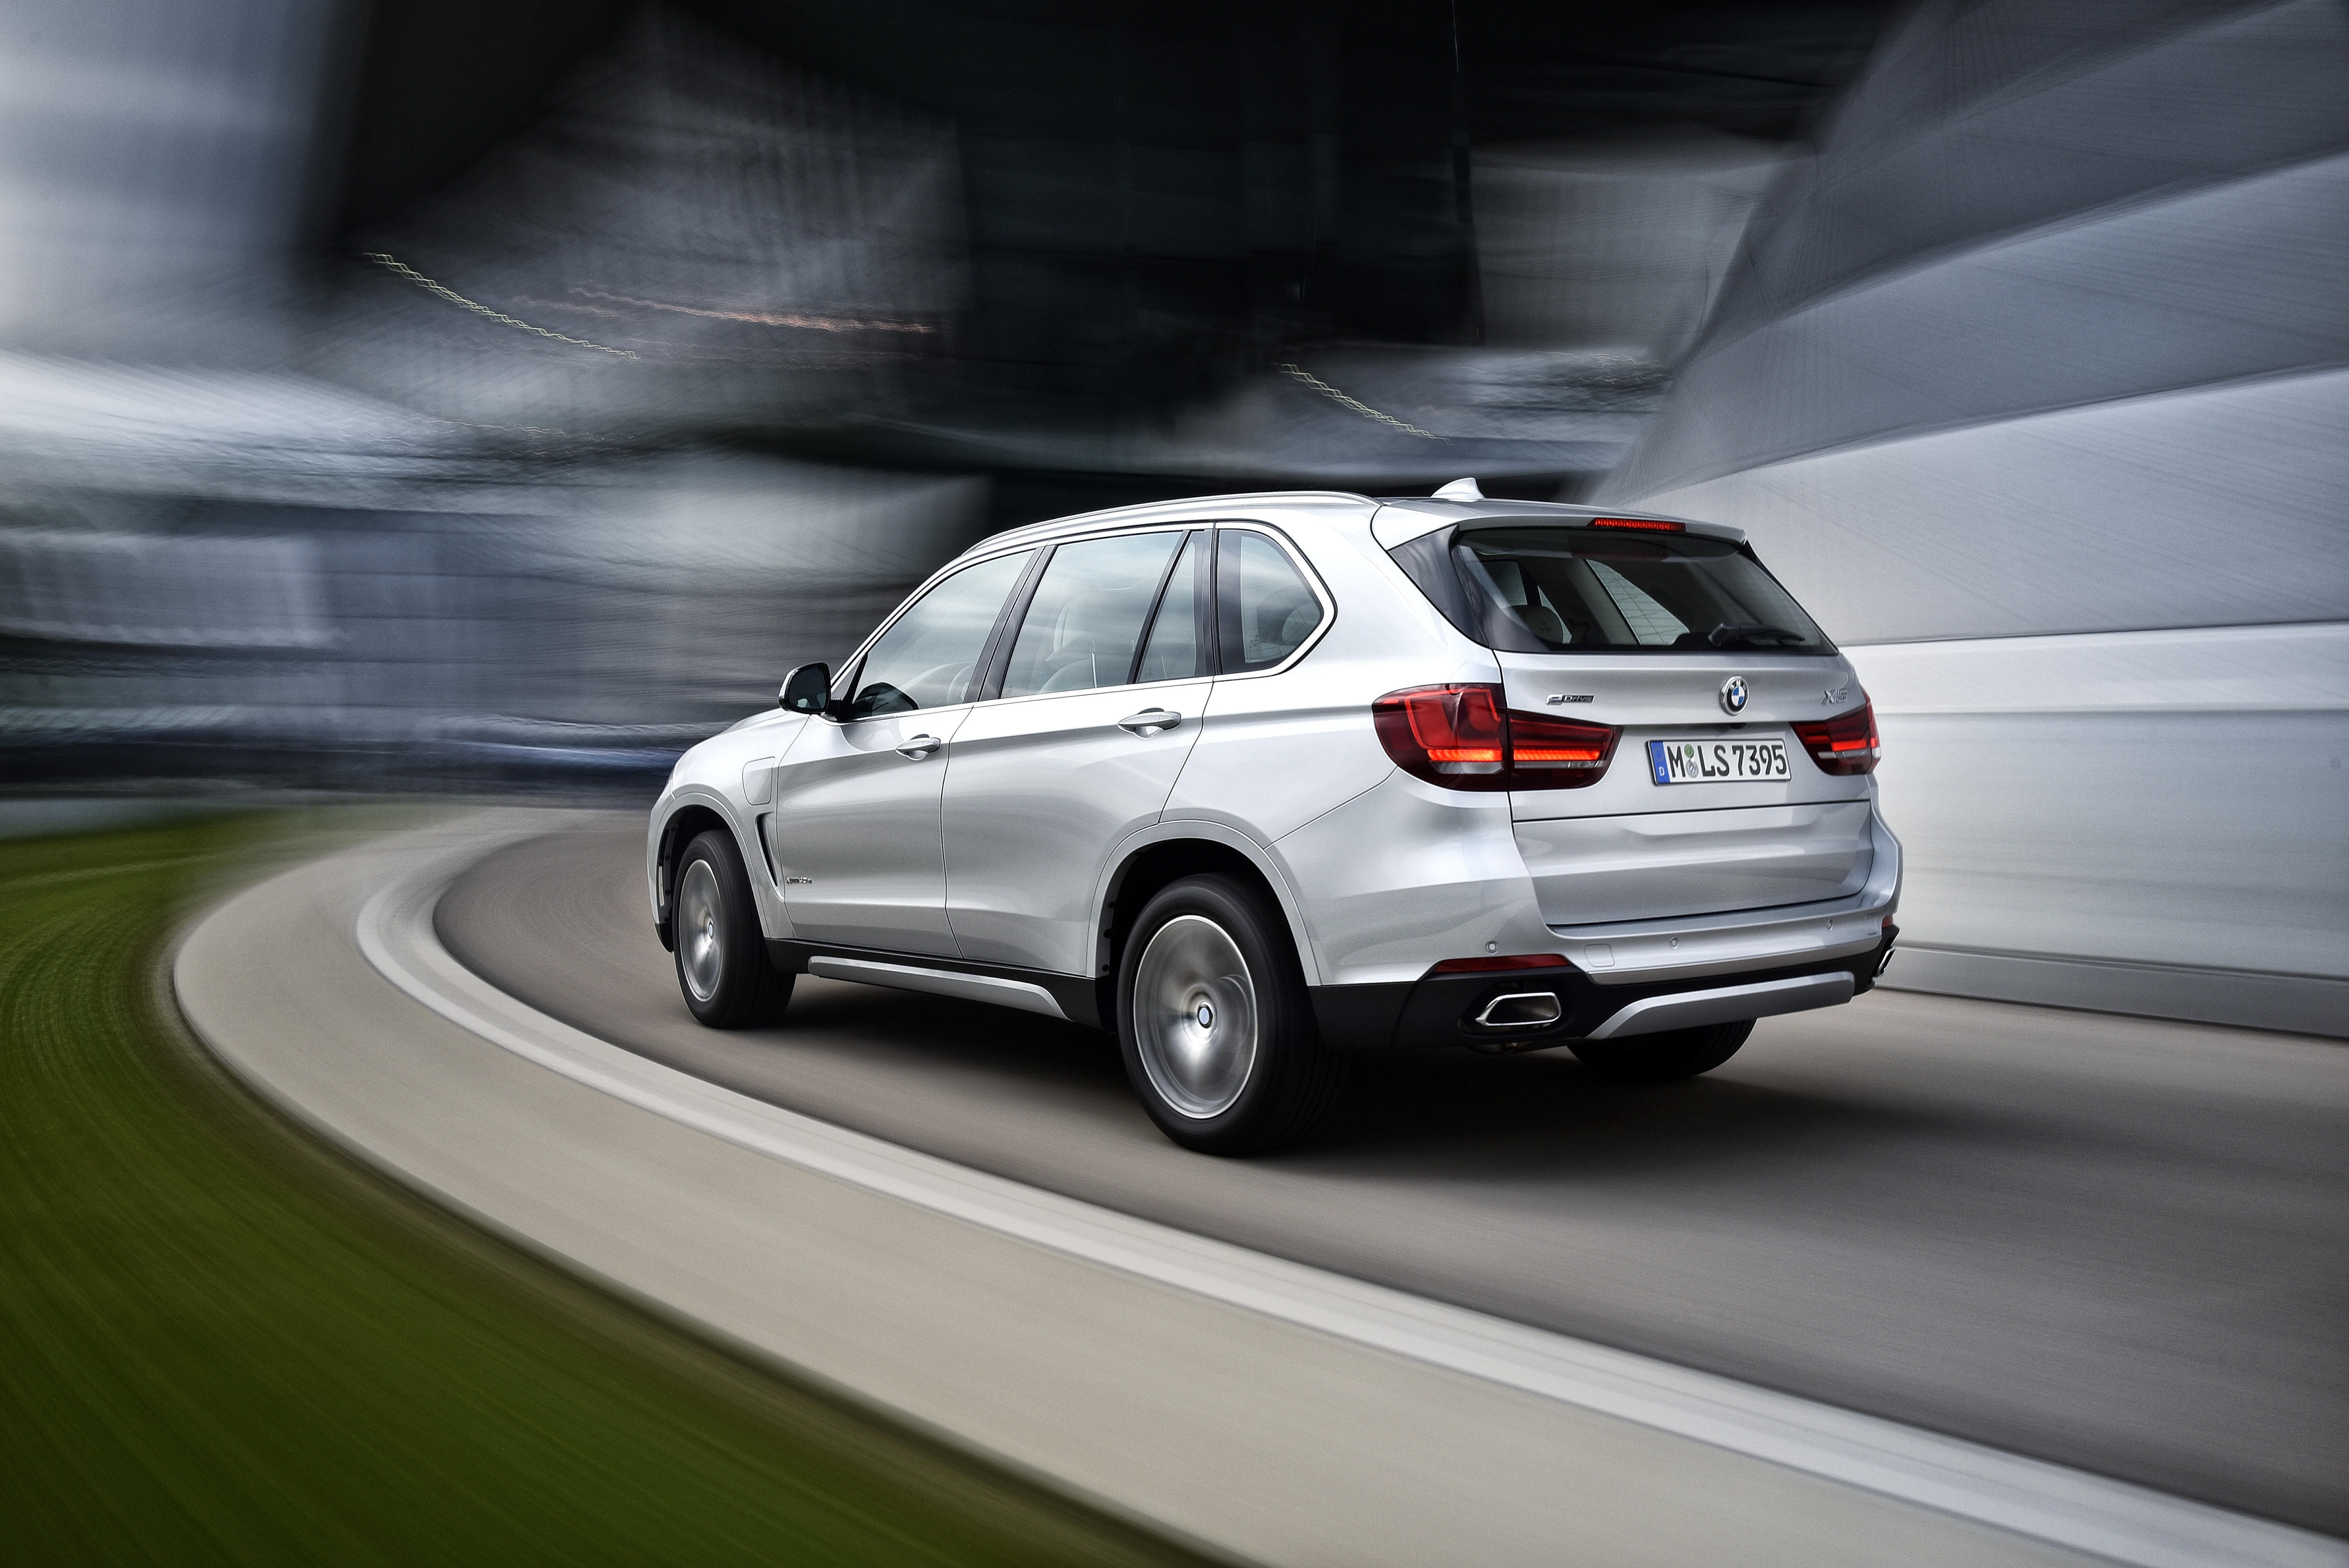 BMW X5 xDrive 40e Exterior colour: Glacier Silver, Upolstry: Ivory White Nappa Leather, Pure Excellence Exterior Design, max. system output: 230kW/313 hp; average consumption: 3,4-3,3 Liter/100 km 15,4-15,3kWh/100km - CO2-emissions: 78 Ð 77 g/km